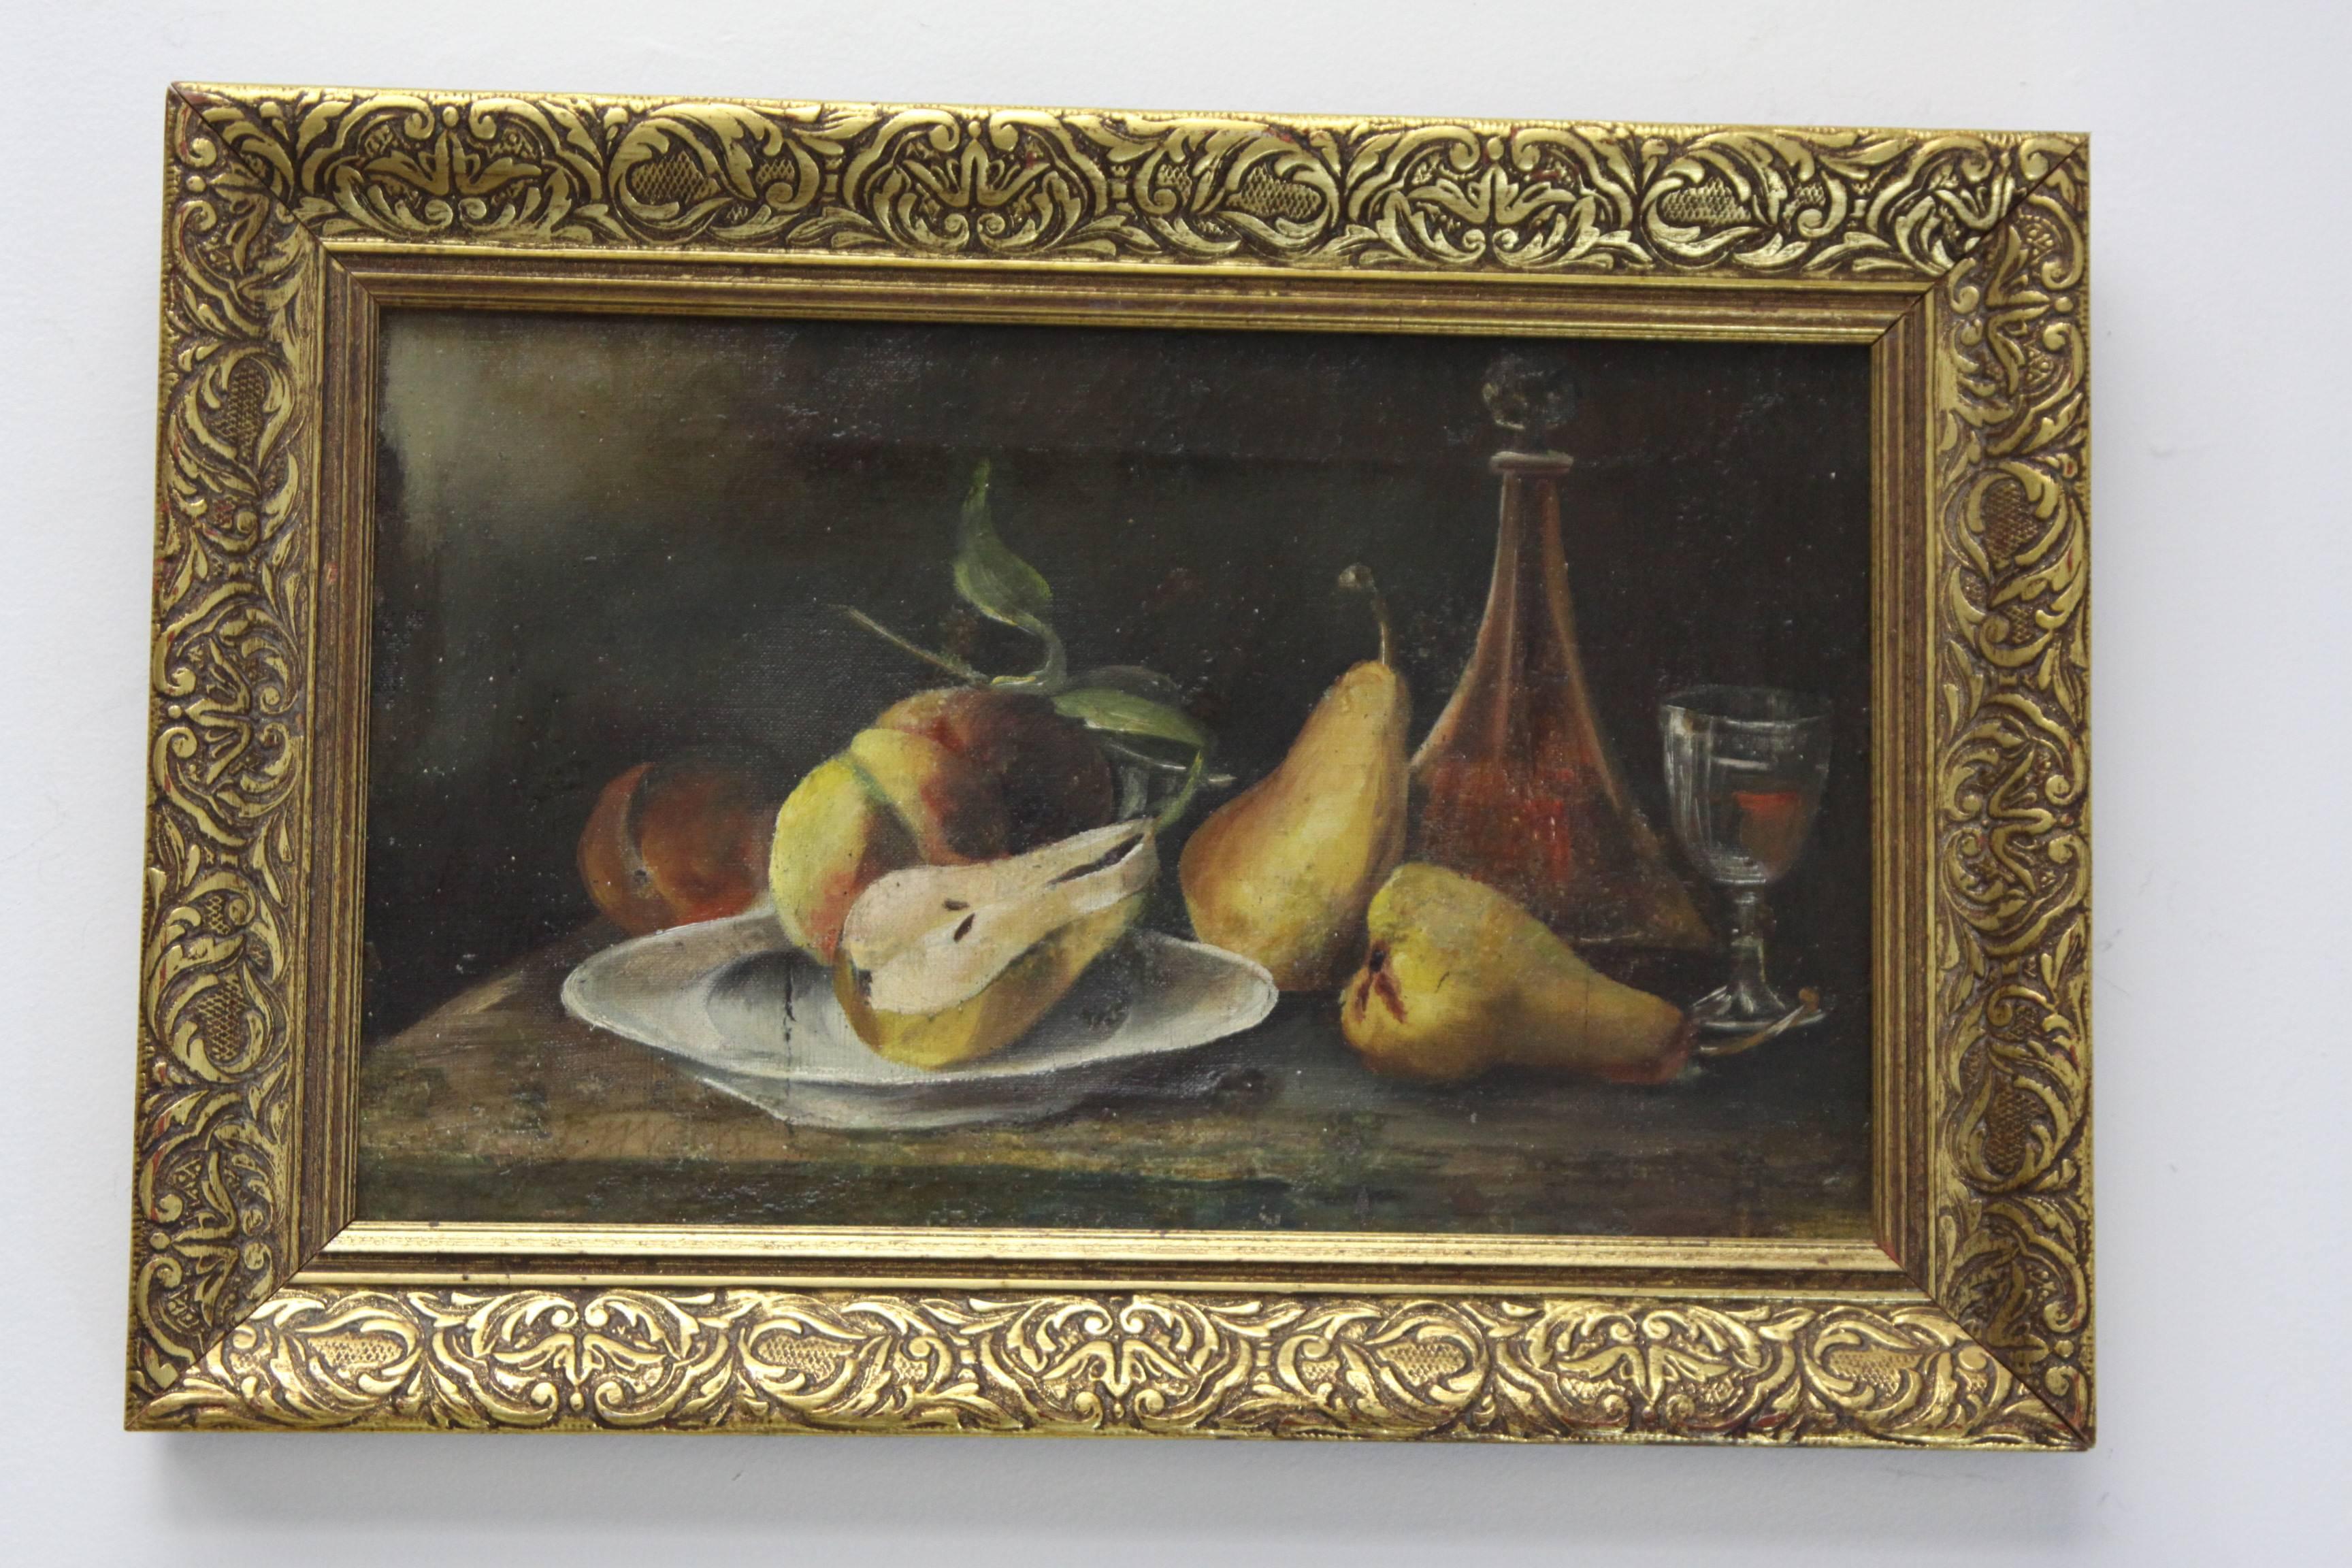 Wonderful still life by Georgius Jacobus Johannes Van Os (1782-1861). Painting height 9.5 inches x 15.5 inches width x 2 inches deep. Total frame size is 13